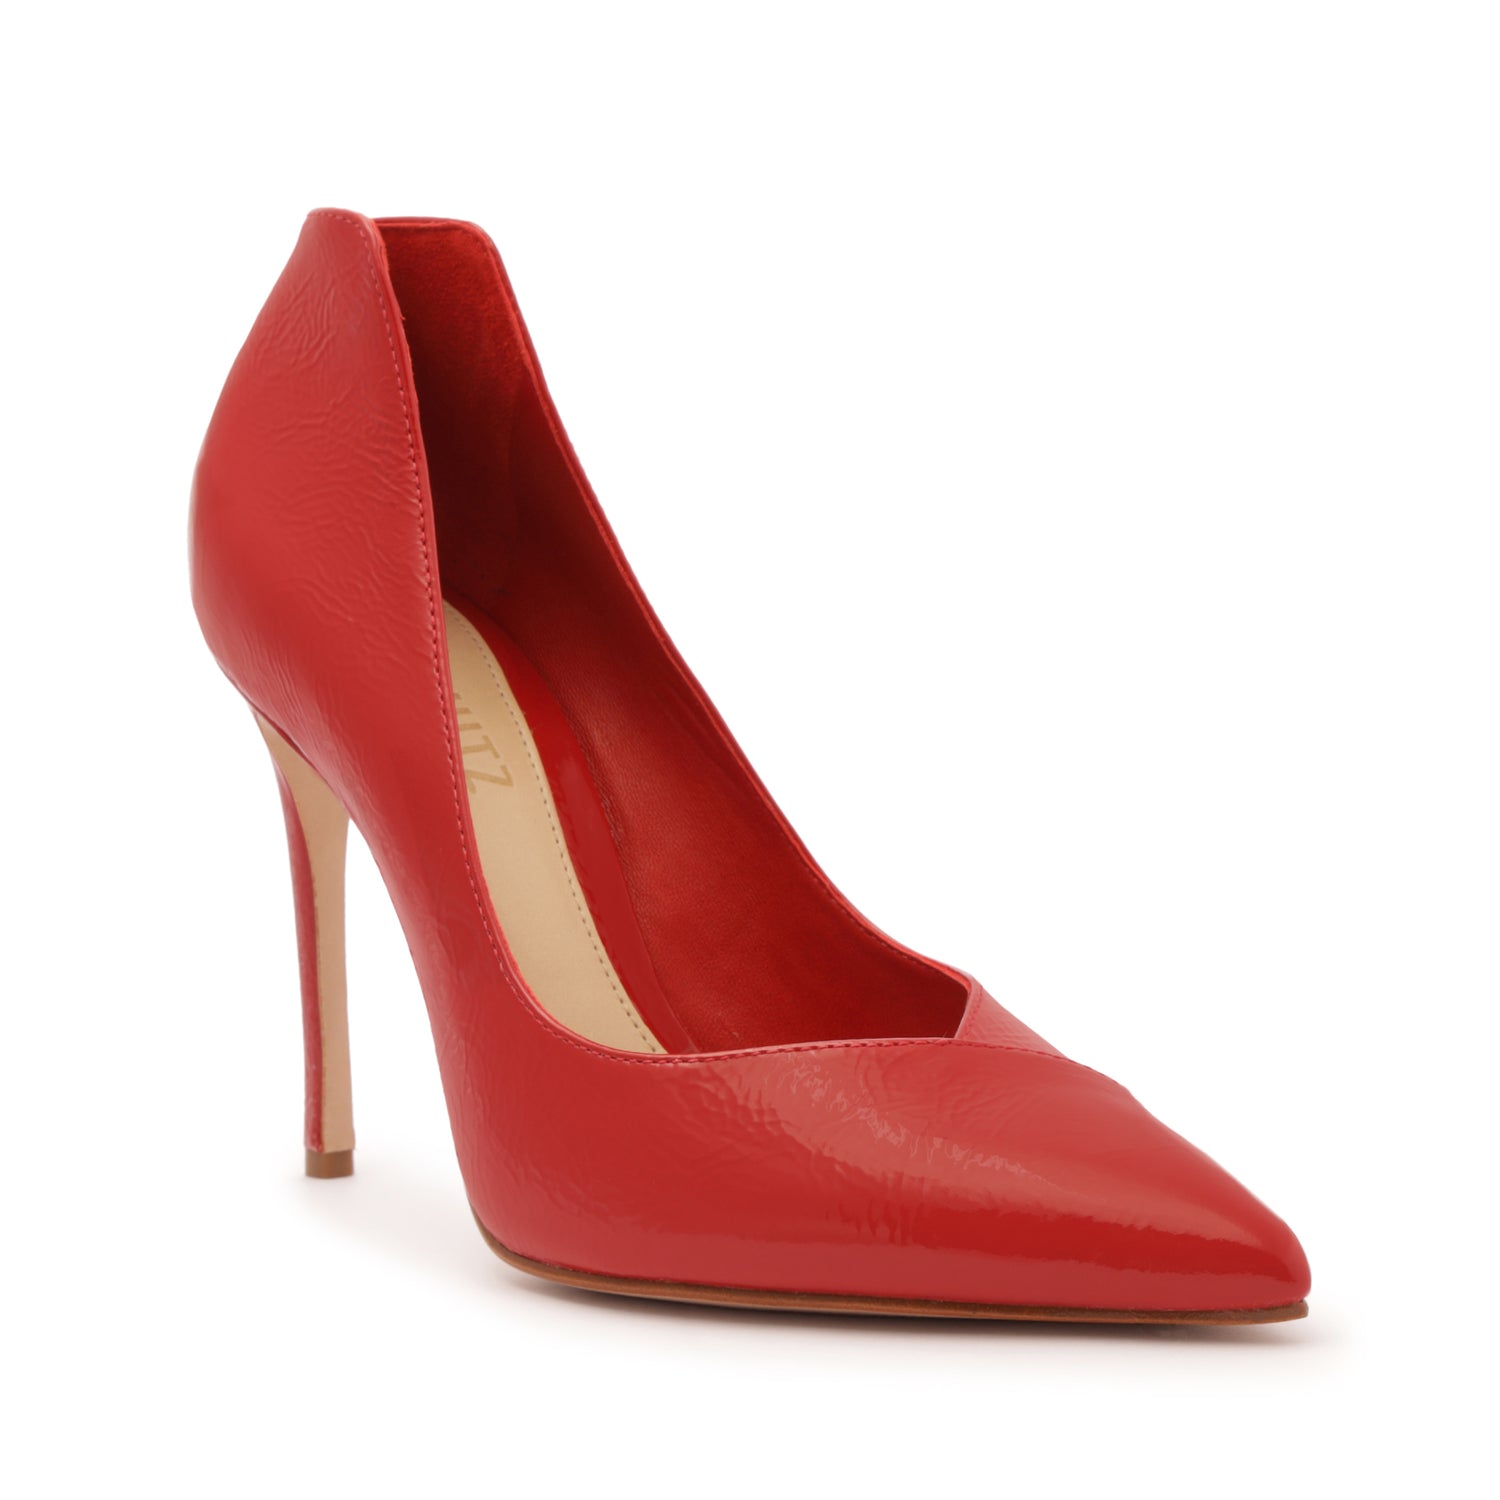 Arlette Nappa Leather Pump Club Red Nappa Leather